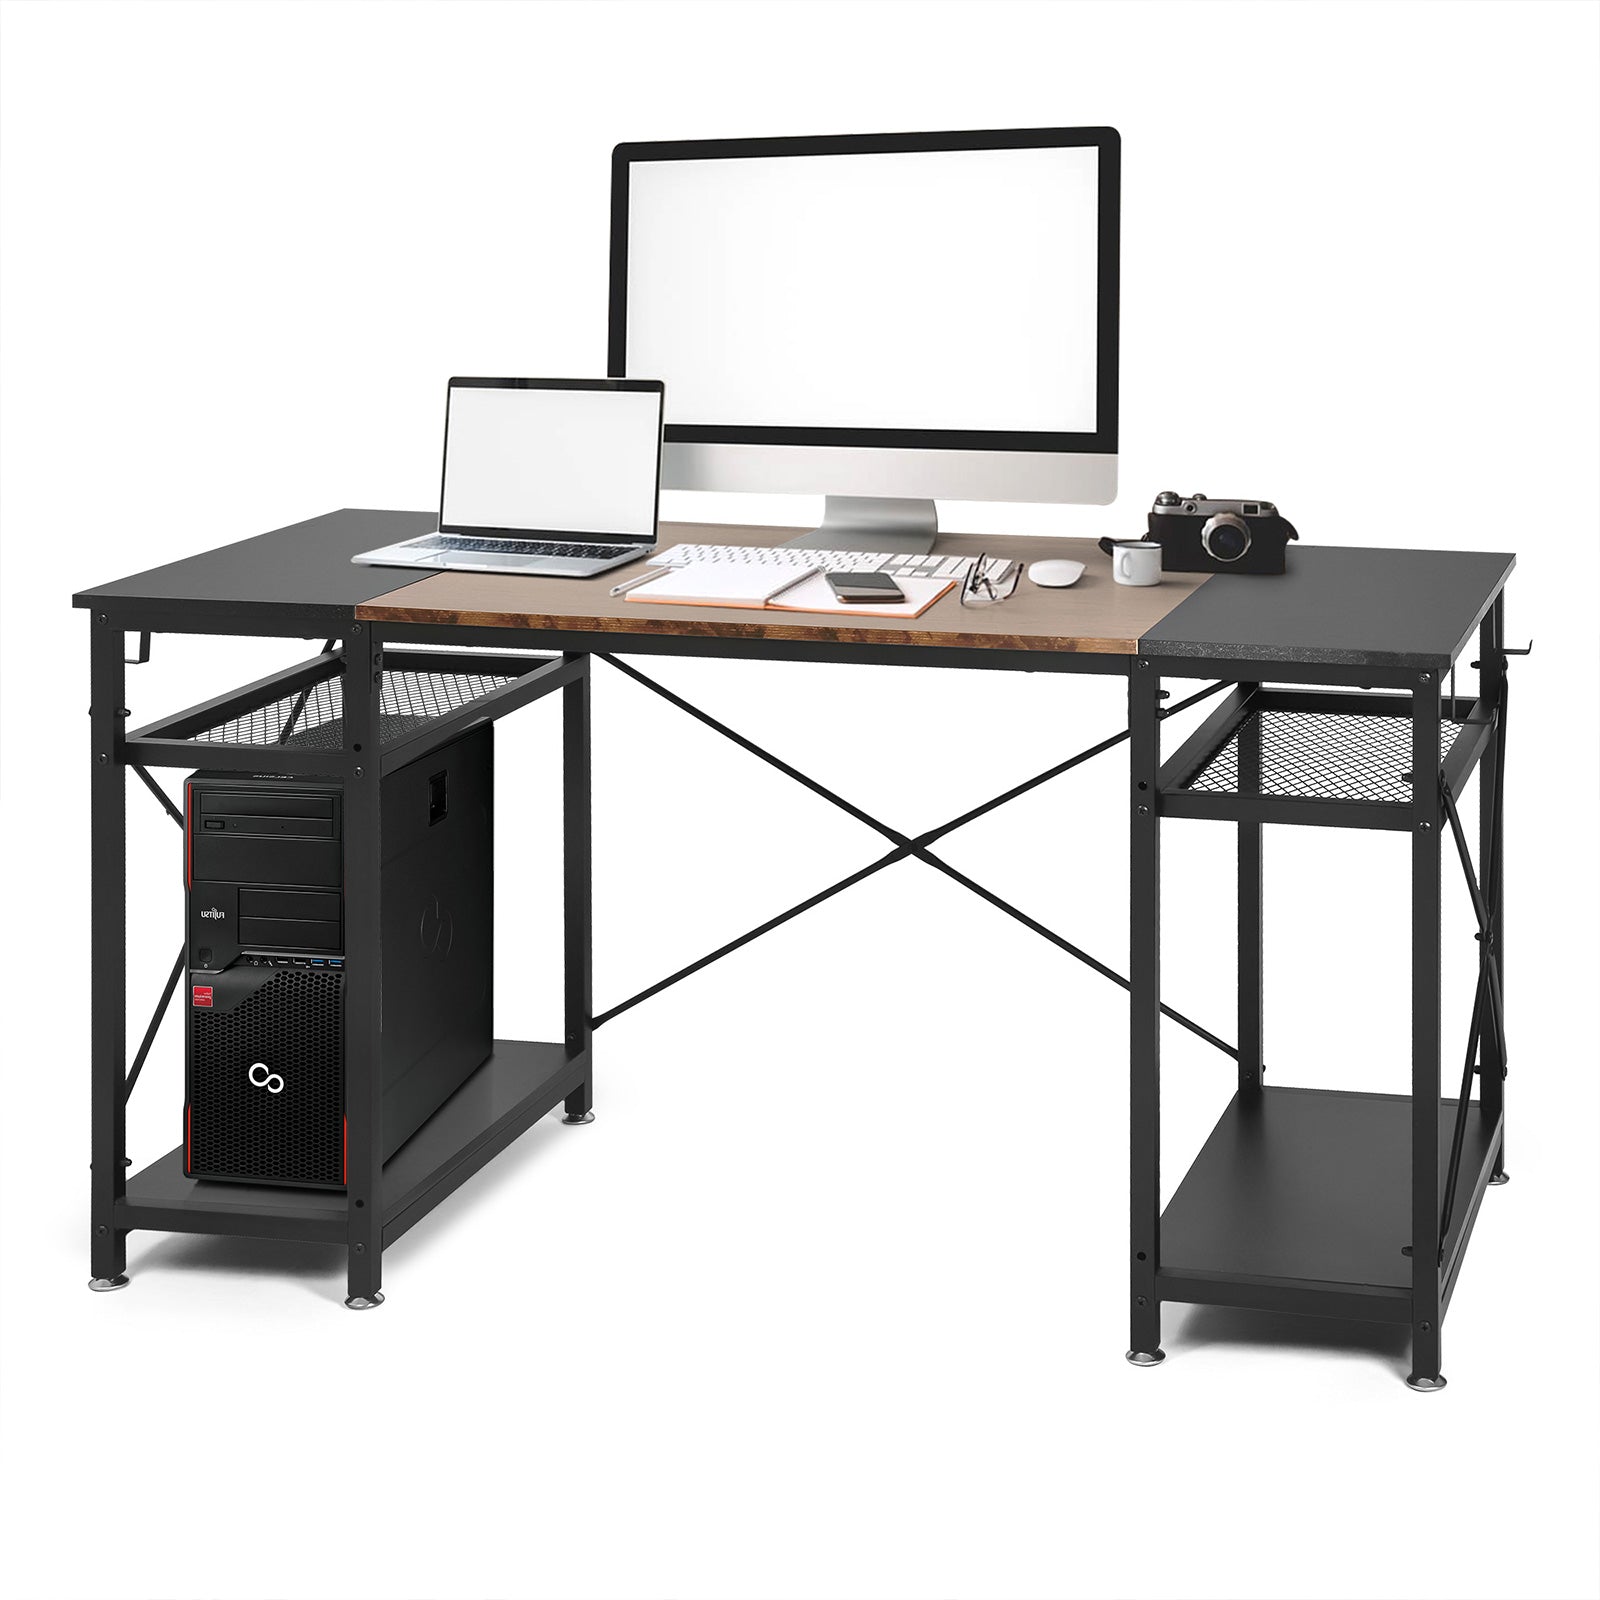 47.2" Home Office Computer Desk with Storage Shelves and 4 Hooks, Rustic and Black